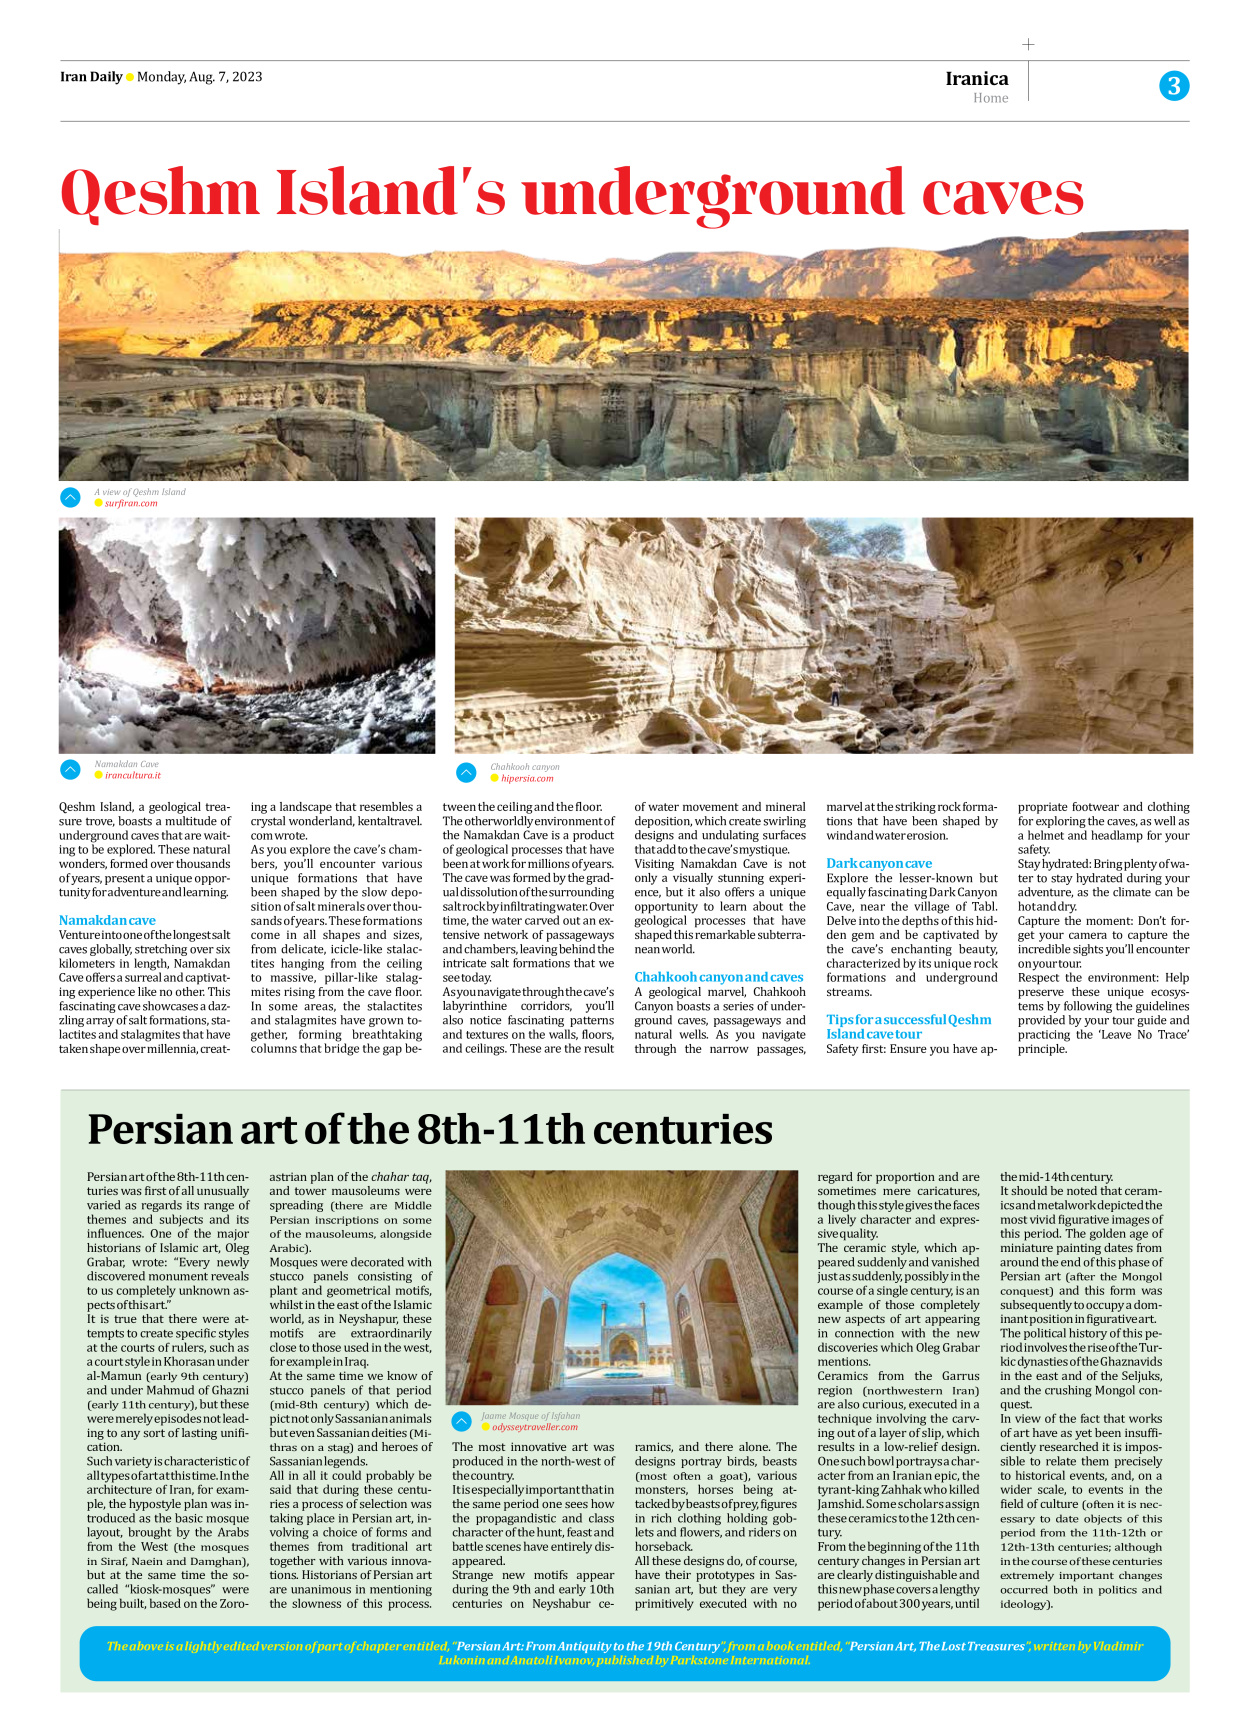 Iran Daily - Number Seven Thousand Three Hundred and Fifty Six - 07 August 2023 - Page 3